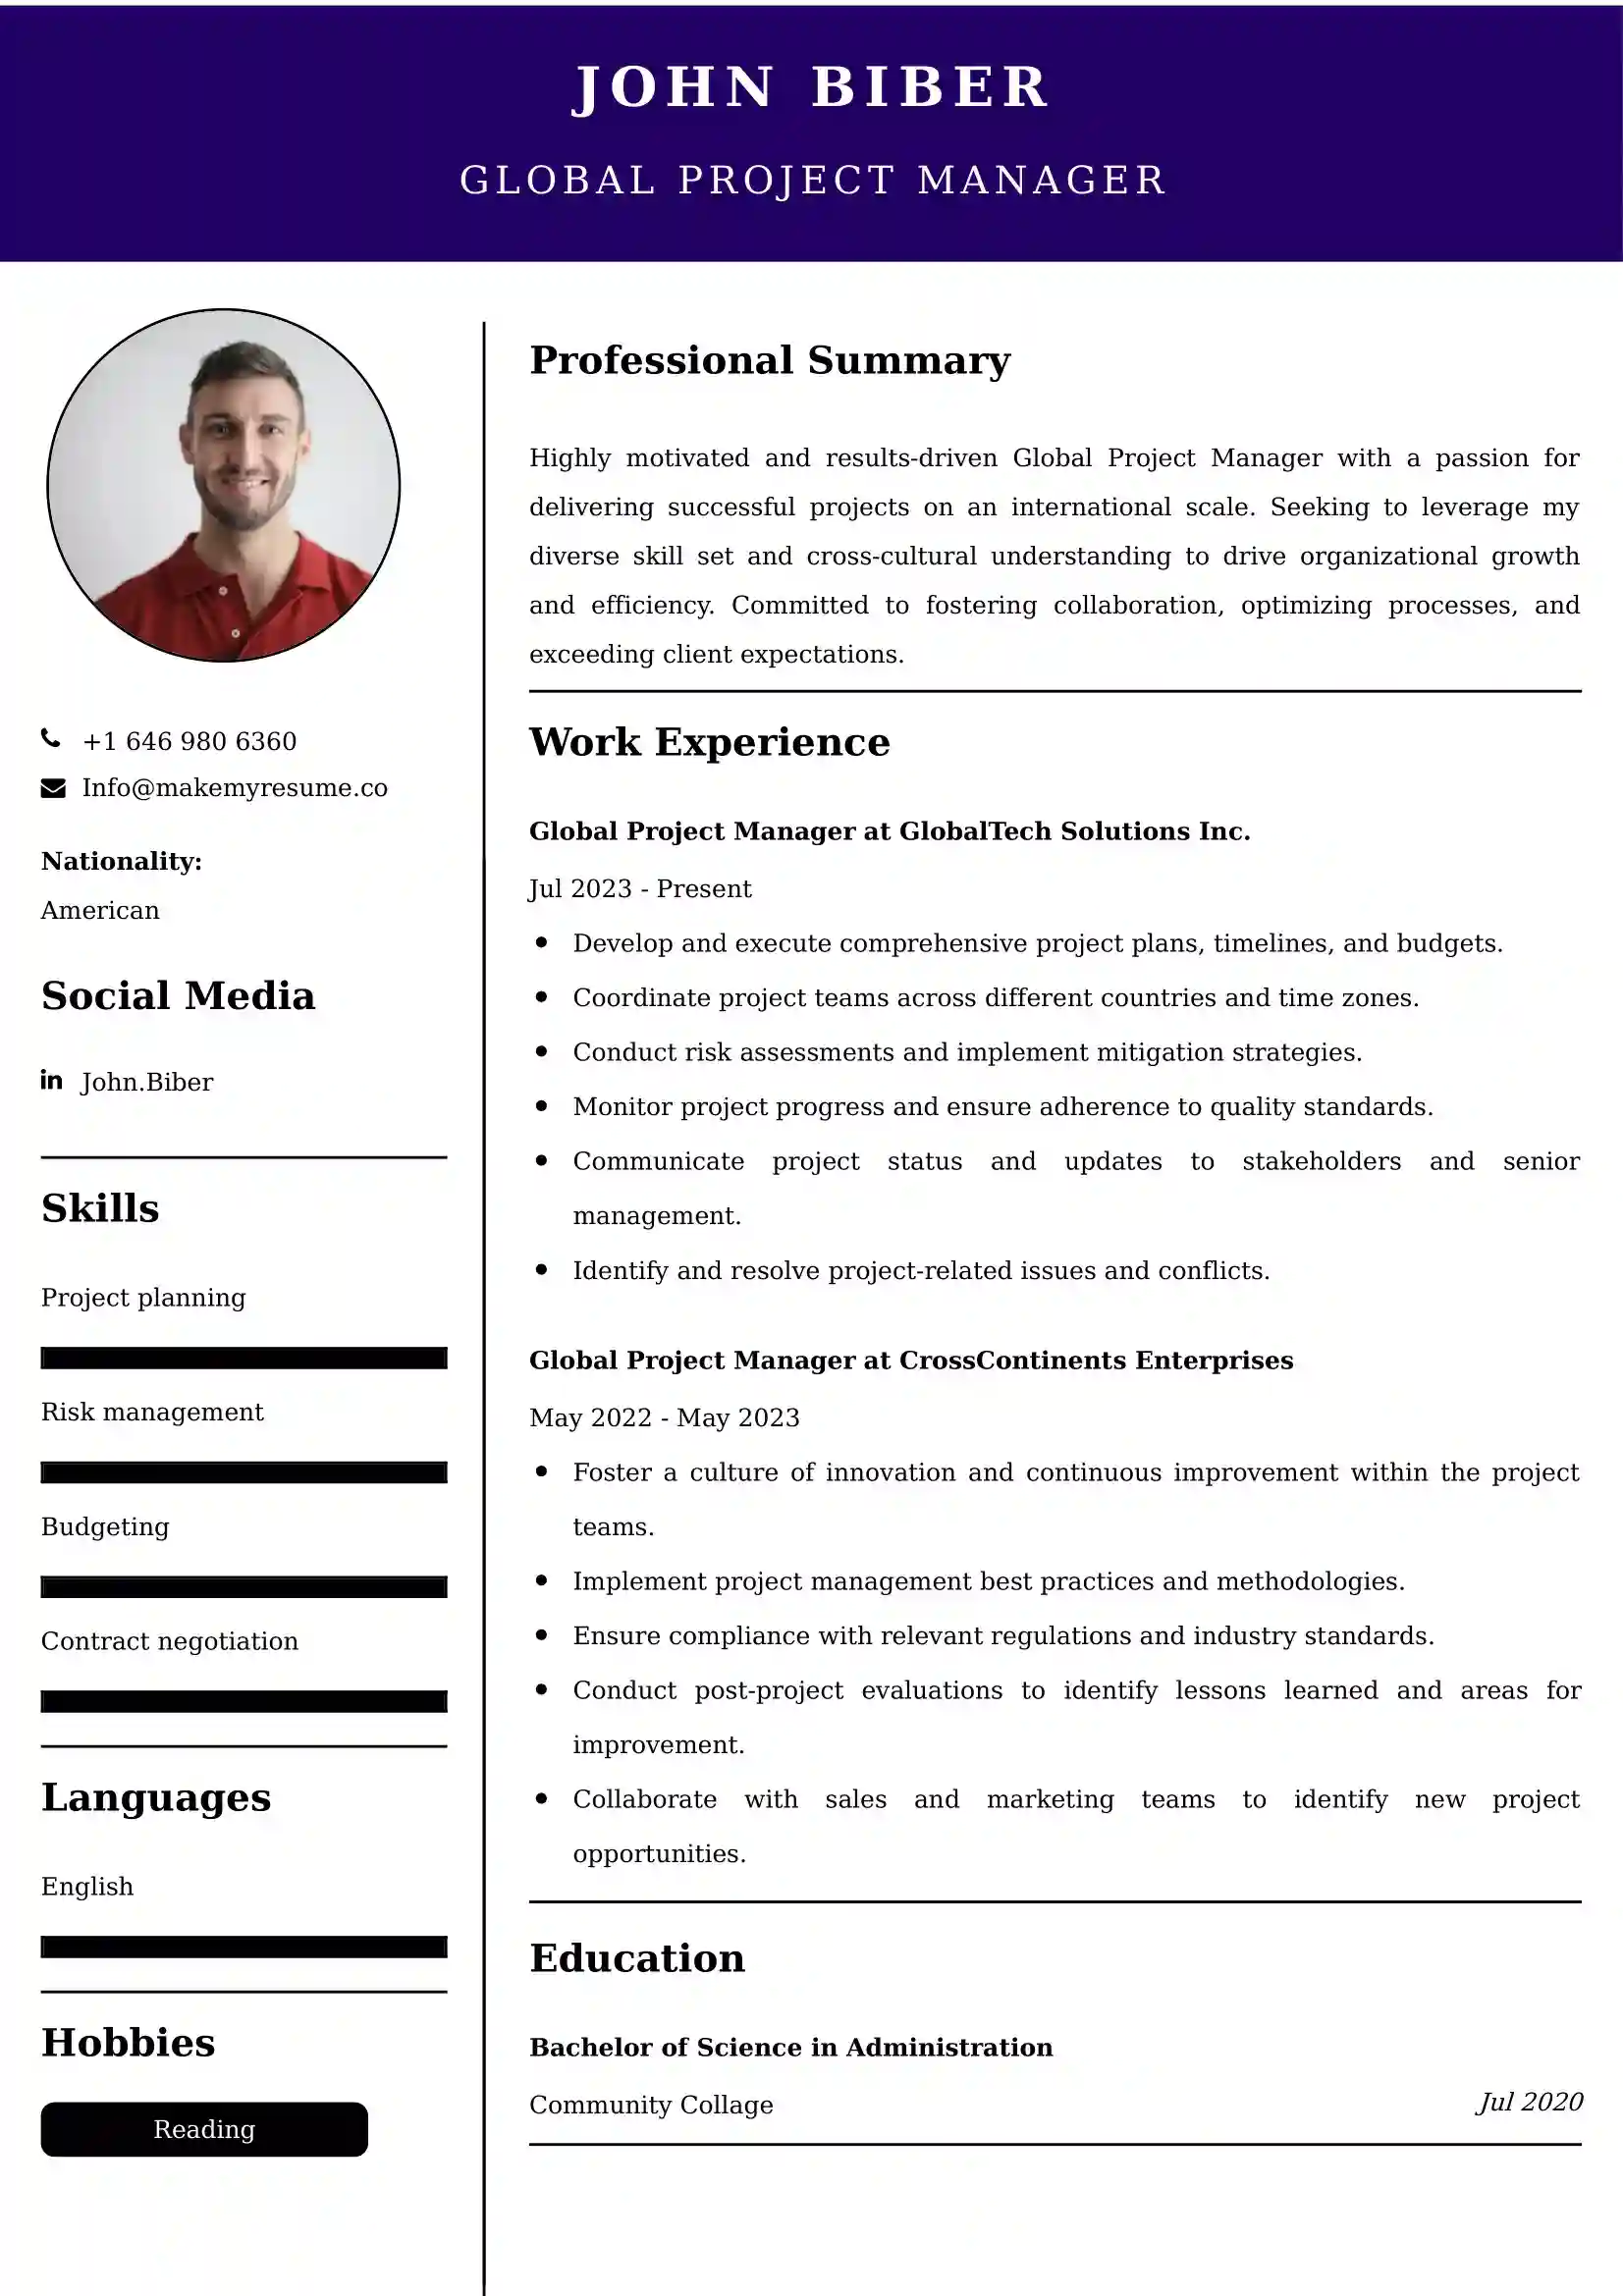 Global Project Manager Resume Examples - Brazilian Format, Latest Template